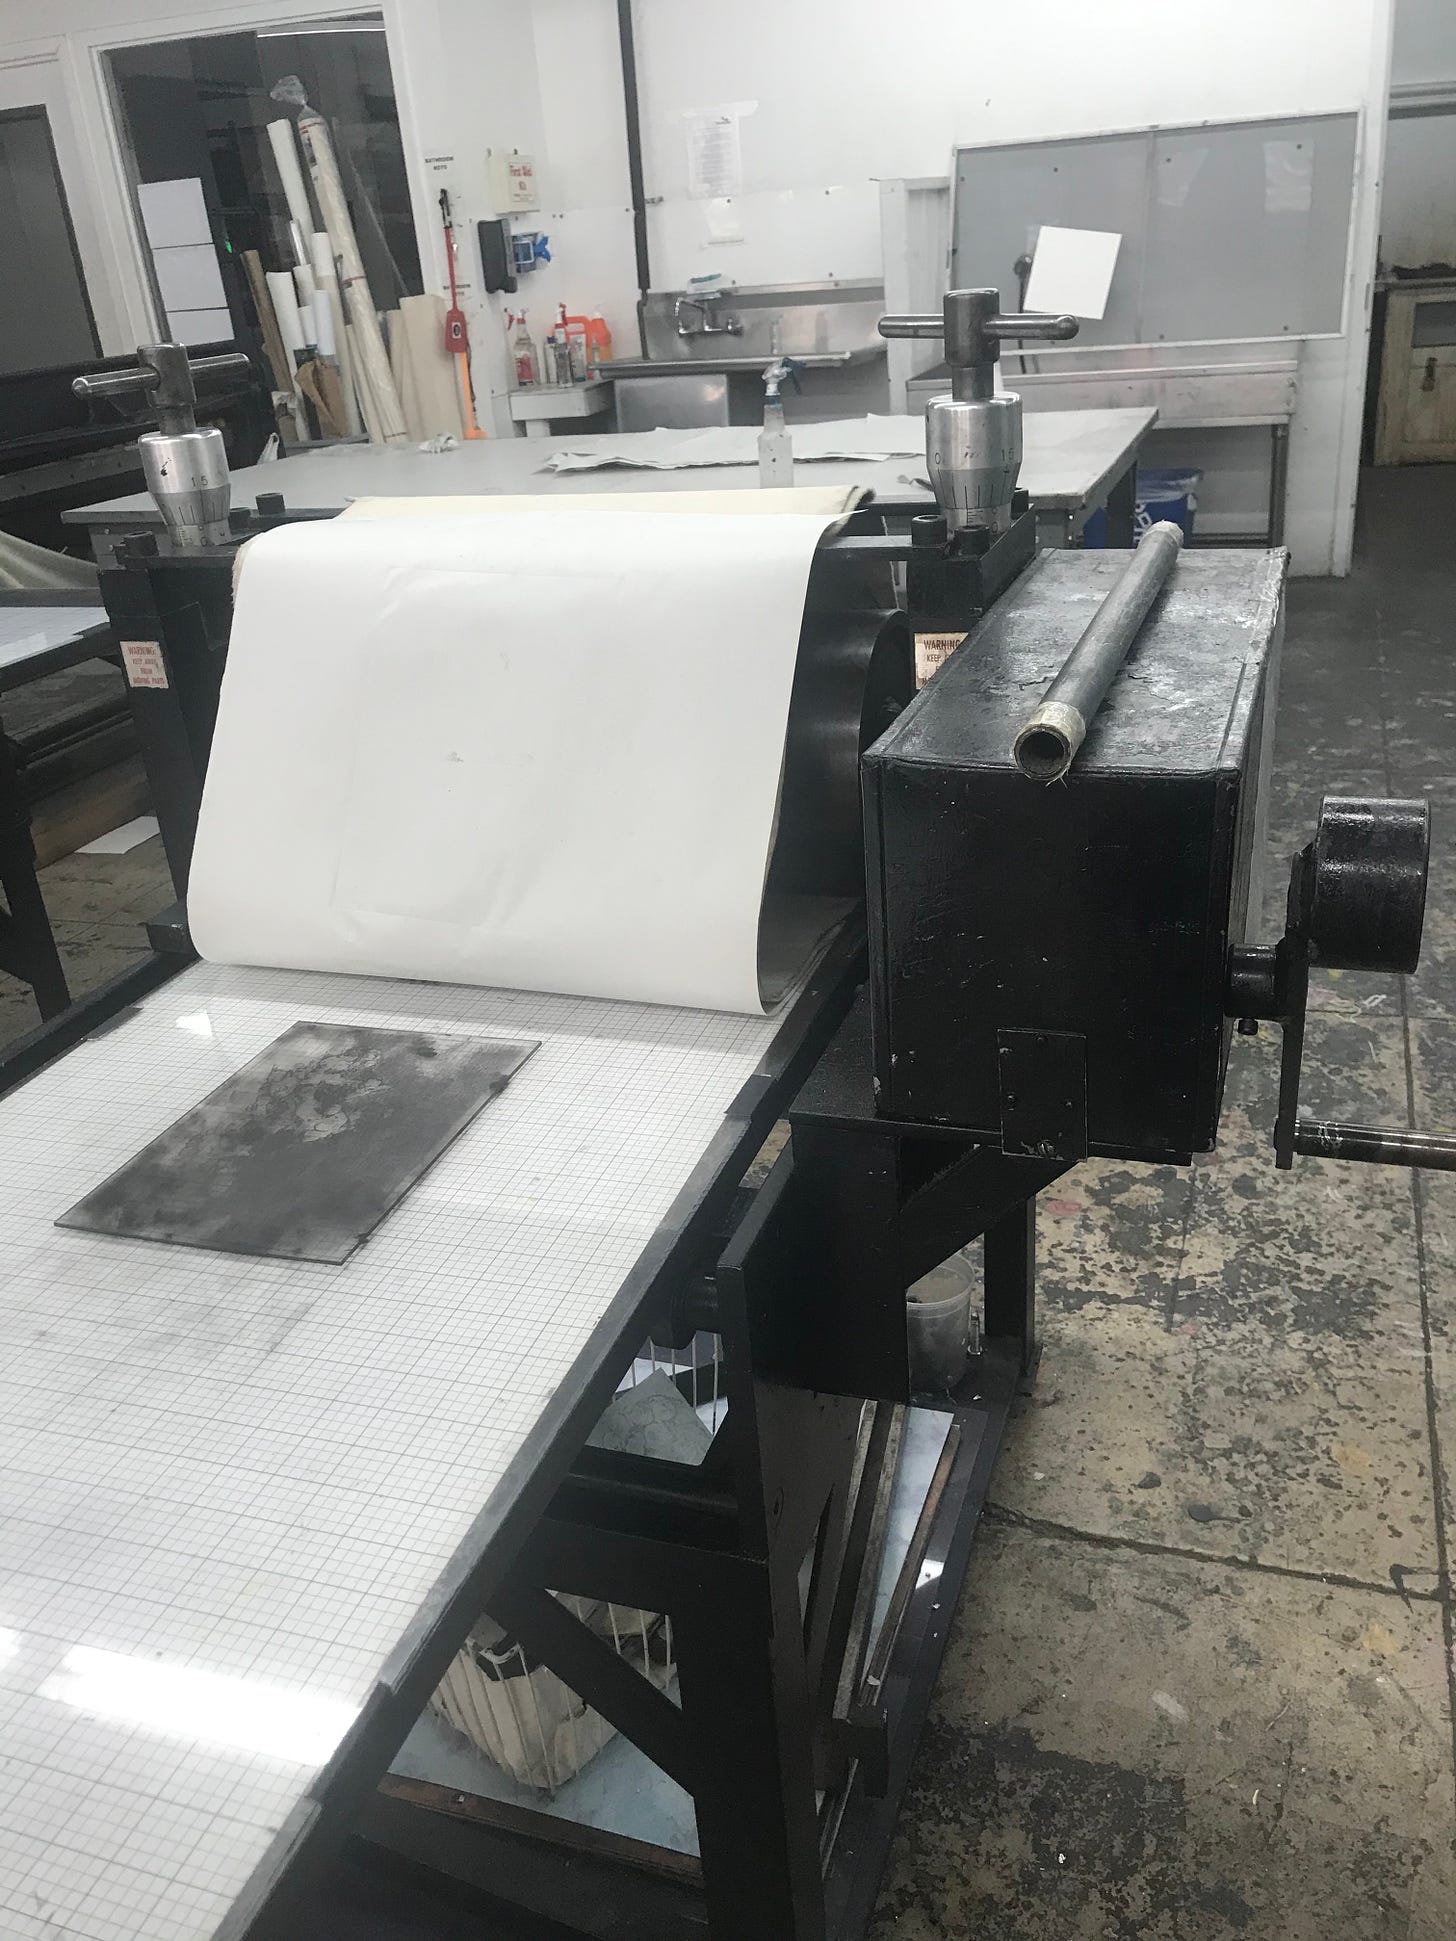 Documentation of intaglio process.  The image shows a large etching prress with an inked plate.